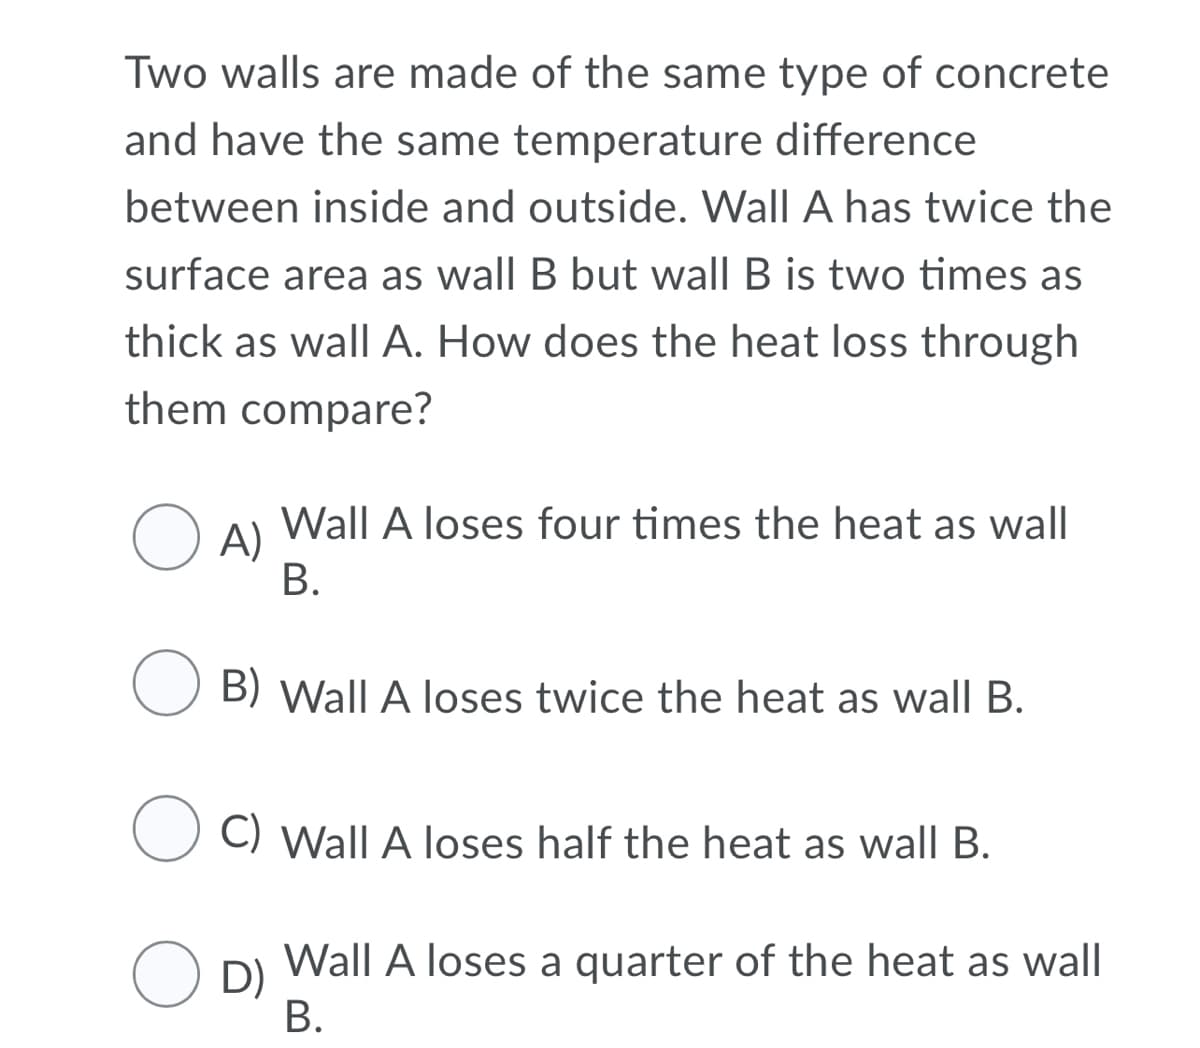 Two walls are made of the same type of concrete
and have the same temperature difference
between inside and outside. Wall A has twice the
surface area as wall B but wall B is two times as
thick as wall A. How does the heat loss through
them compare?
Wall A loses four times the heat as wall
O A)
В.
B) Wall A loses twice the heat as wall B.
C) Wall A loses half the heat as wall B.
Wall A loses a quarter of the heat as wall
O D)
В.
